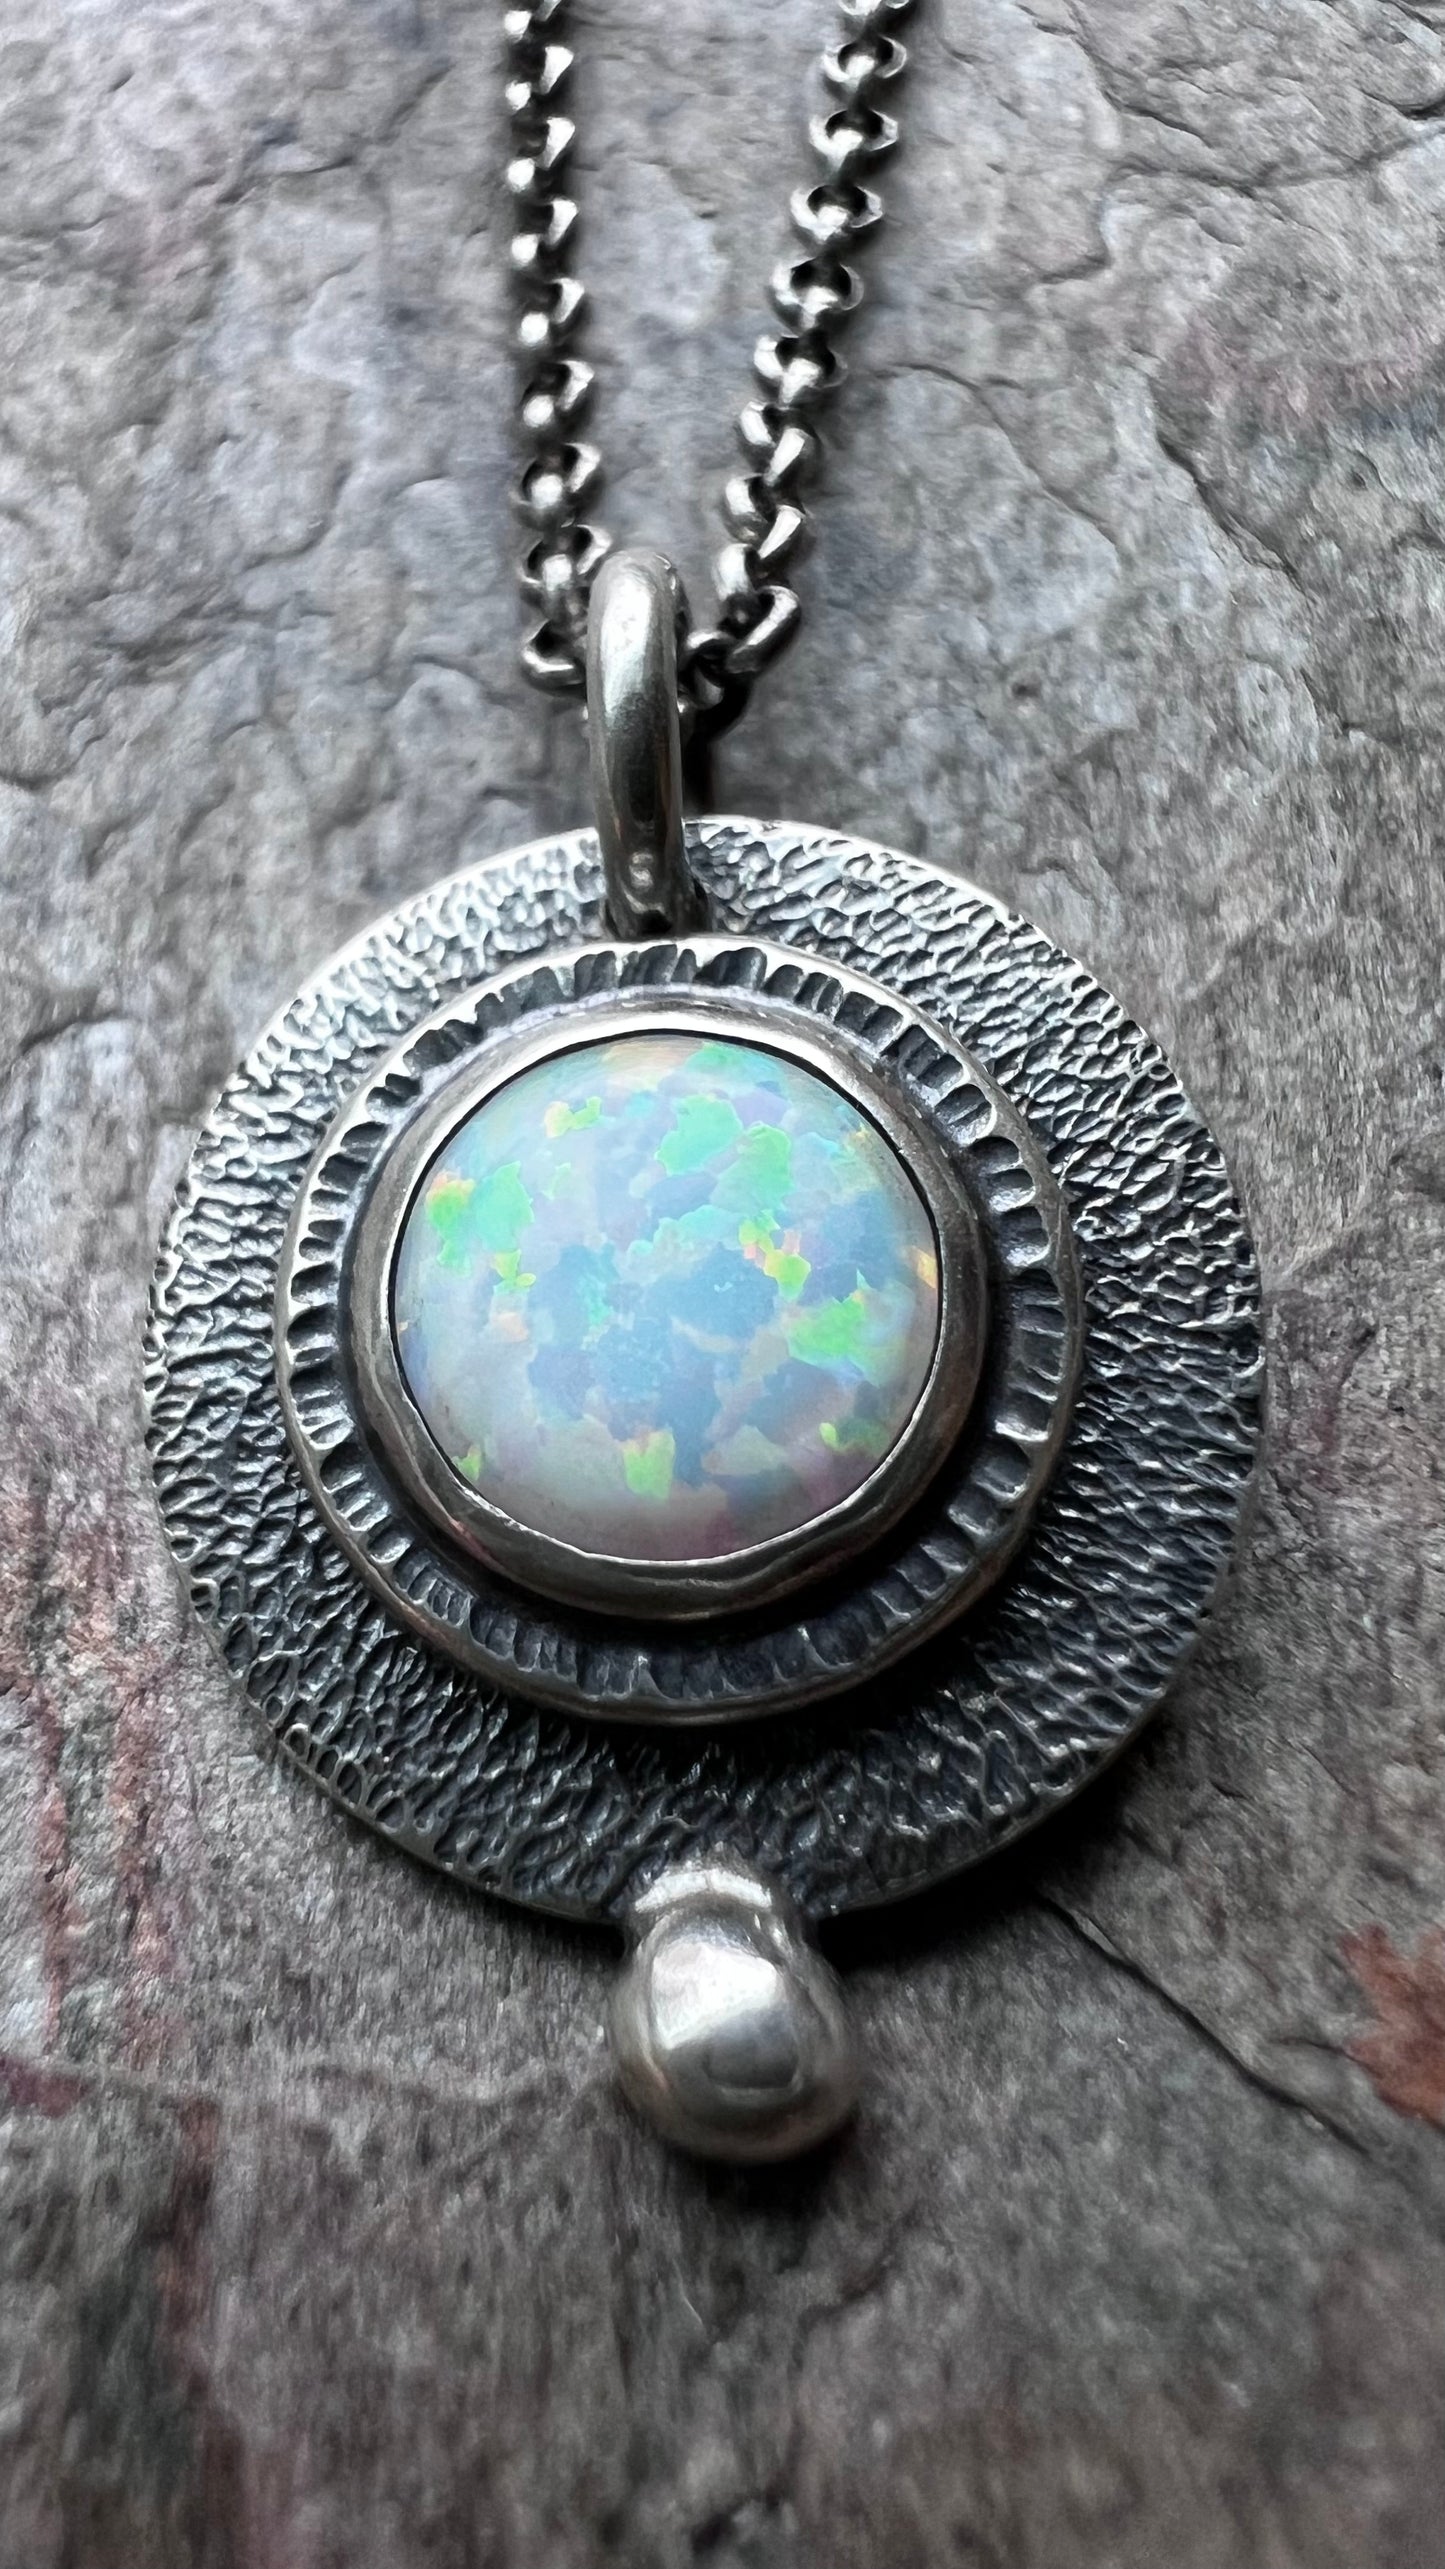 Sterling Silver Simulated Opal Necklace - Handmade Pendant on Sterling Silver Chain